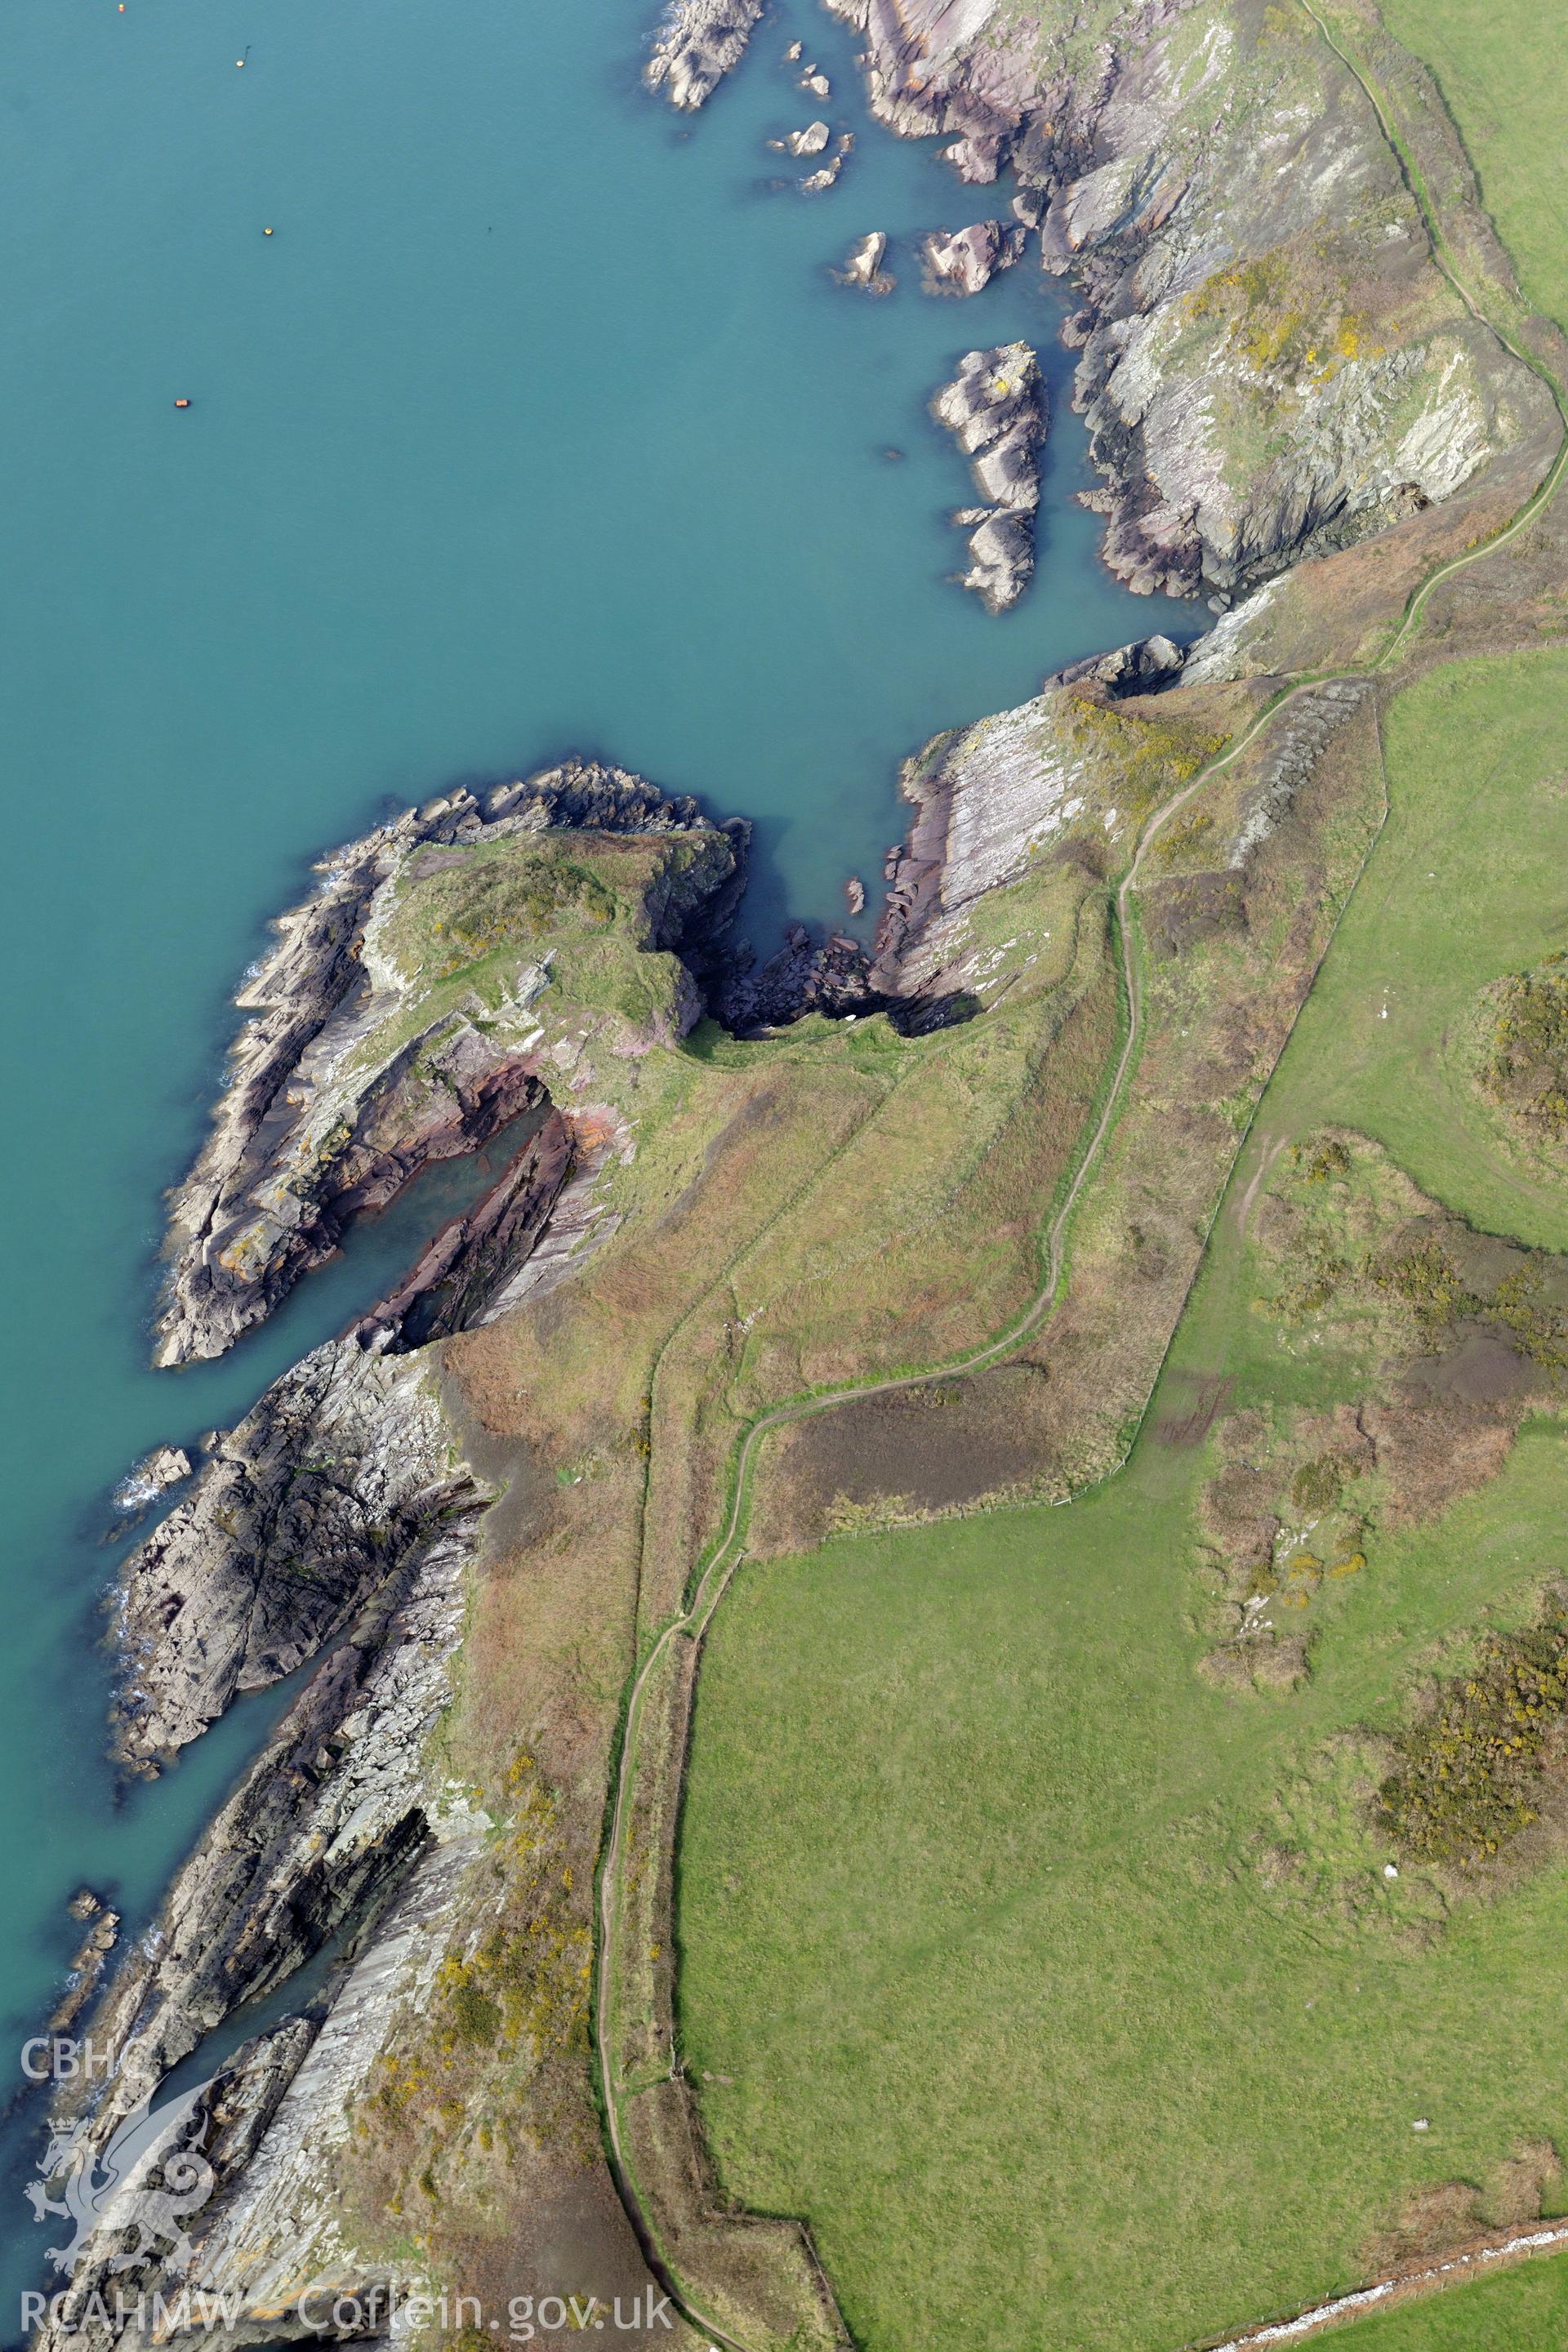 Aerial photography of Castell Henif taken on 27th March 2017. Baseline aerial reconnaissance survey for the CHERISH Project. ? Crown: CHERISH PROJECT 2017. Produced with EU funds through the Ireland Wales Co-operation Programme 2014-2020. All material made freely available through the Open Government Licence.